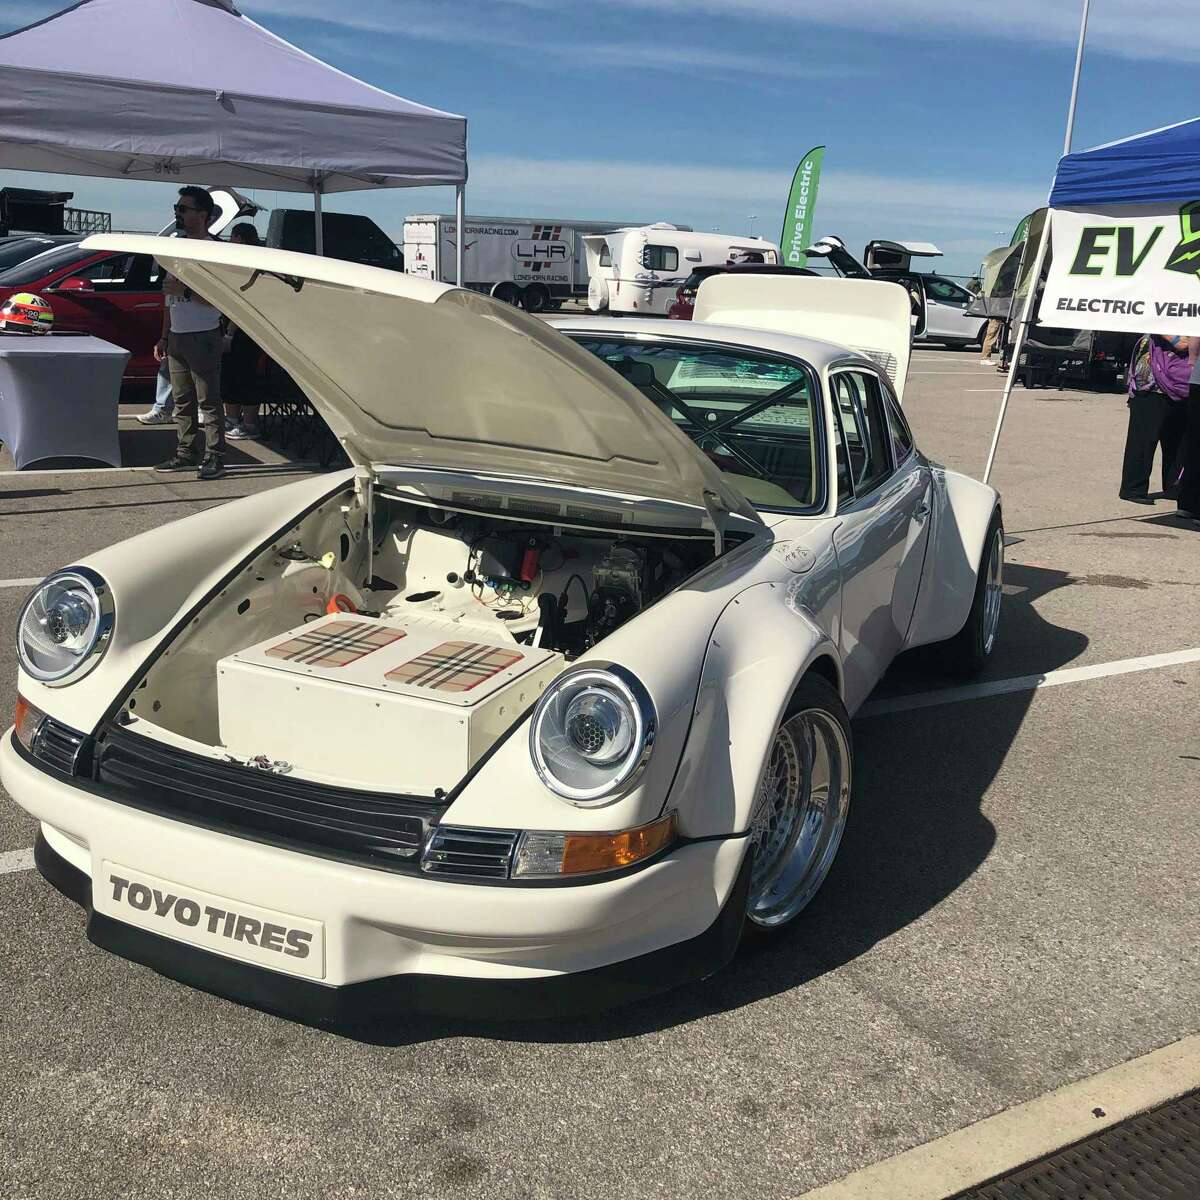 An electric Porsche on display at "Fully Charged LIVE," an electric vehicle event in Austin, Texas.